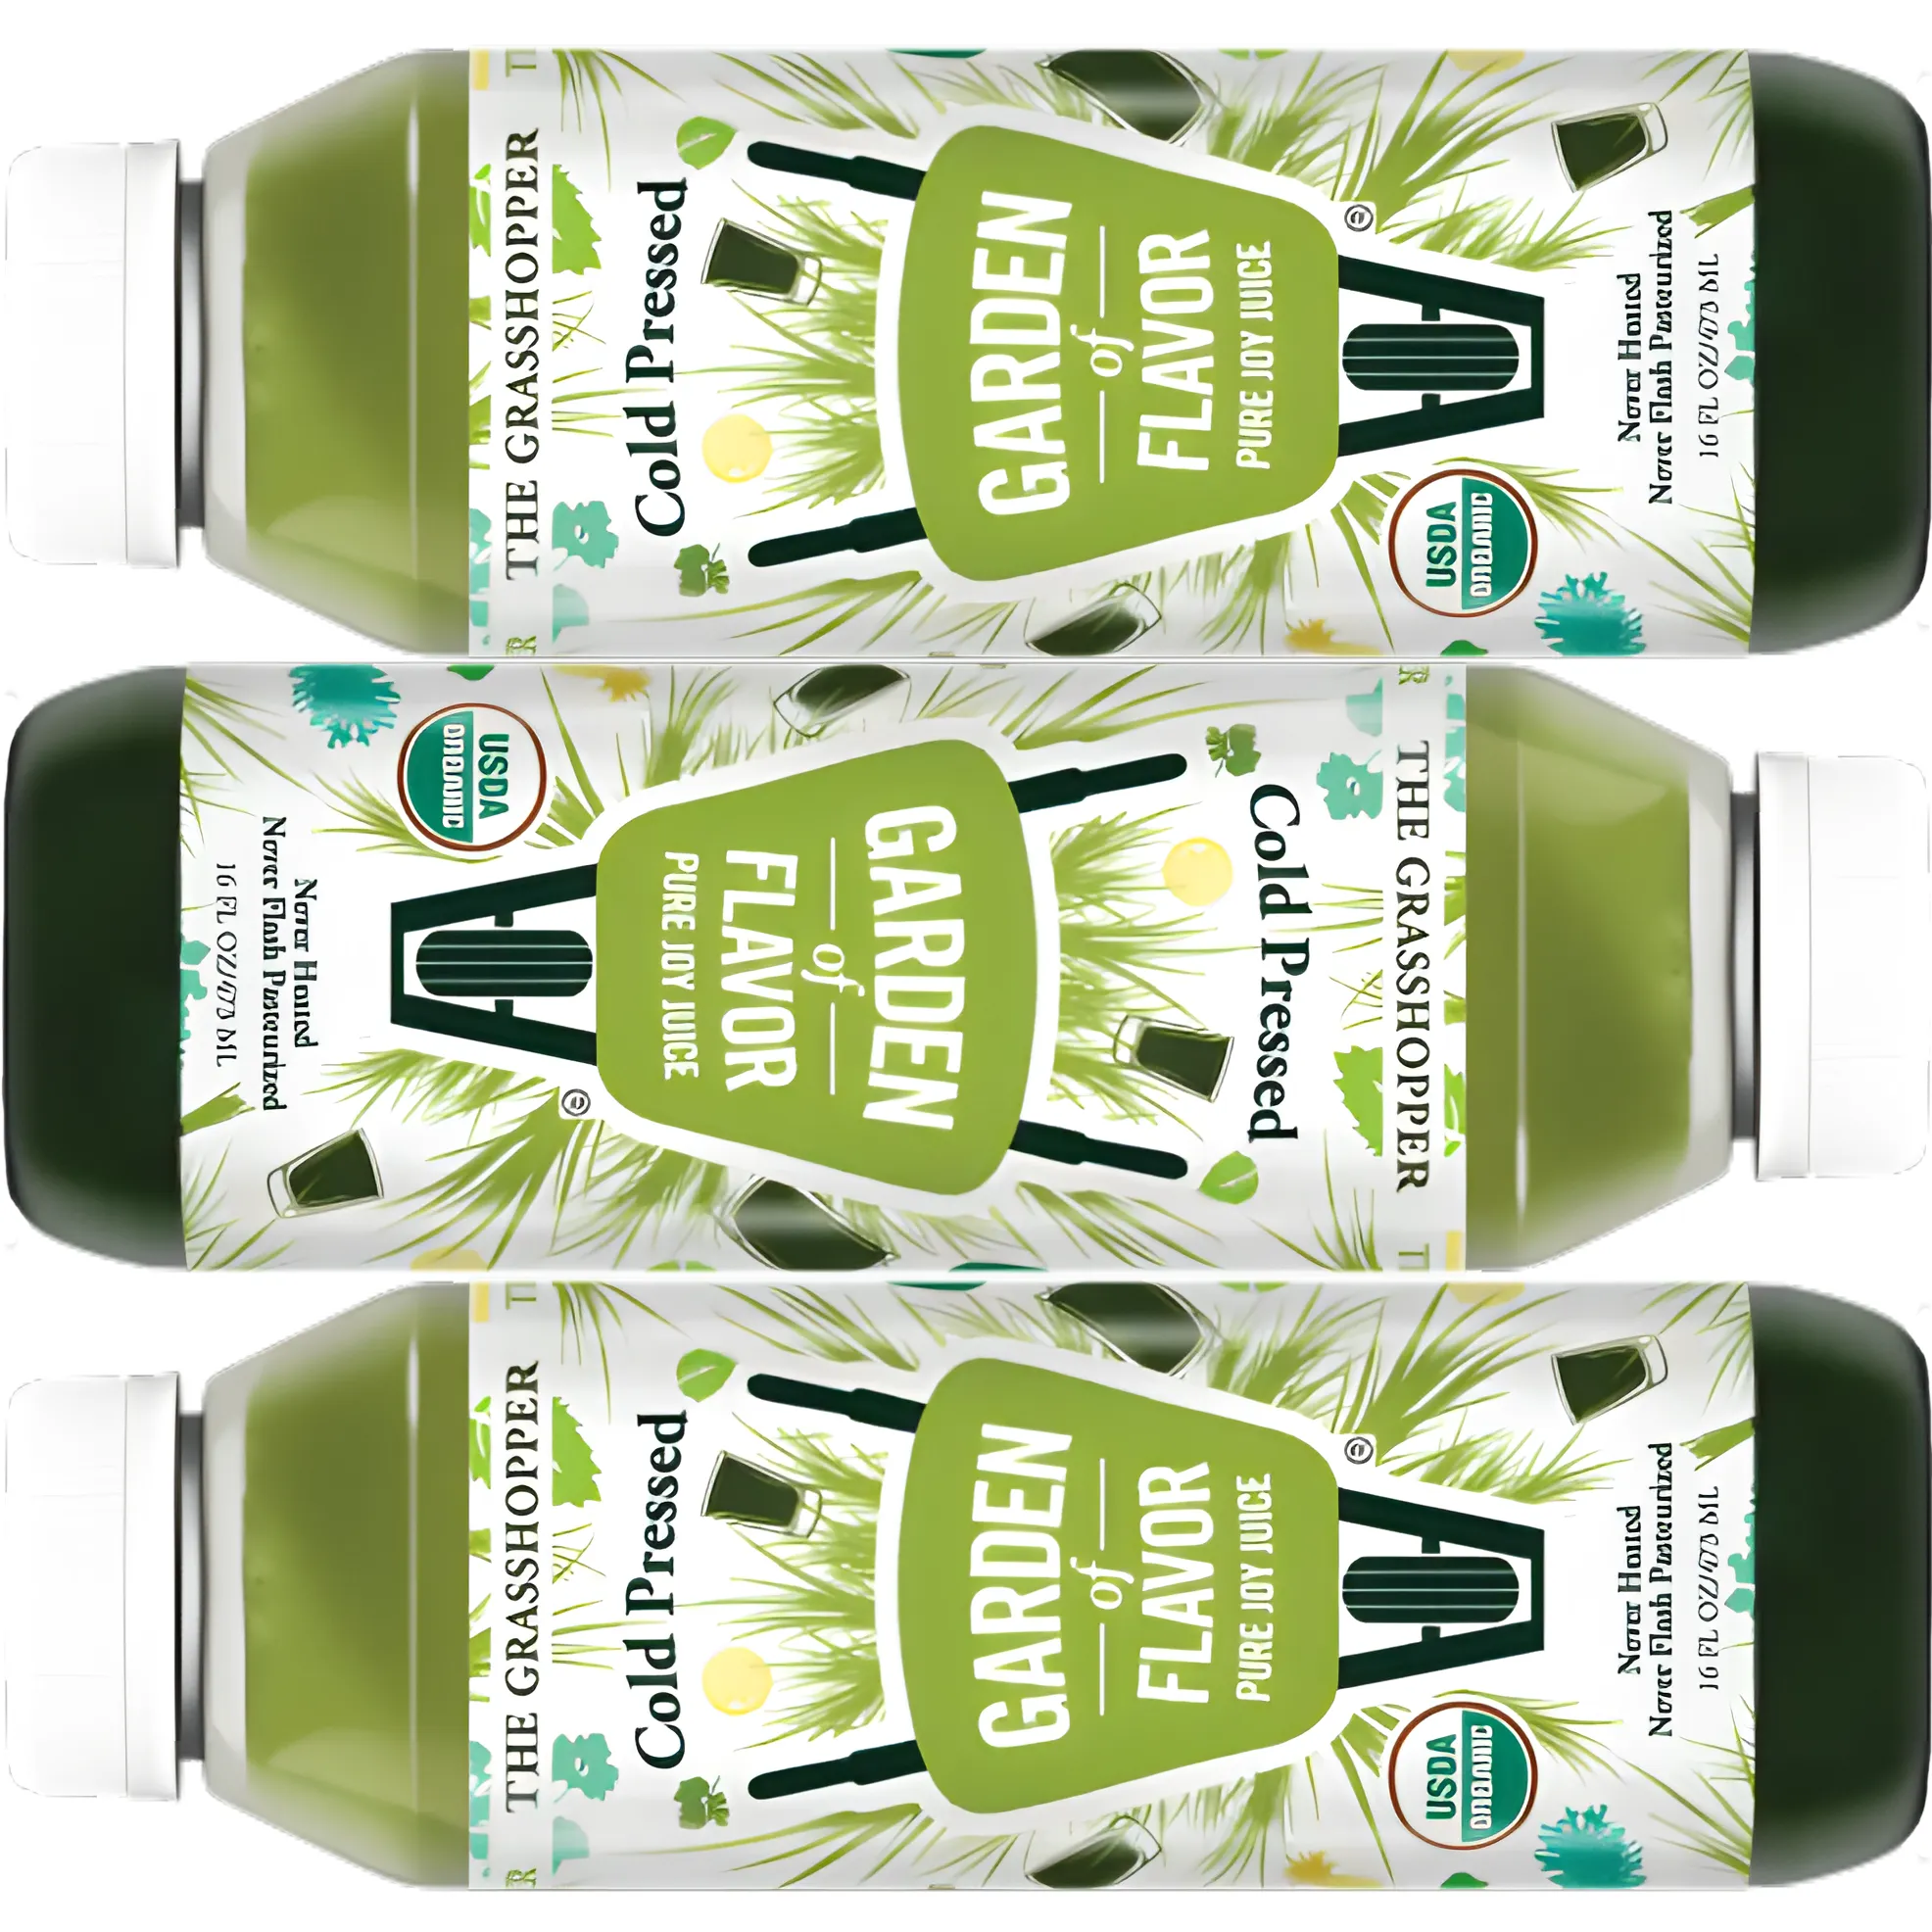 Free Voucher For One Bottle Of Organic Cold-Pressed Juice Worth $7.49